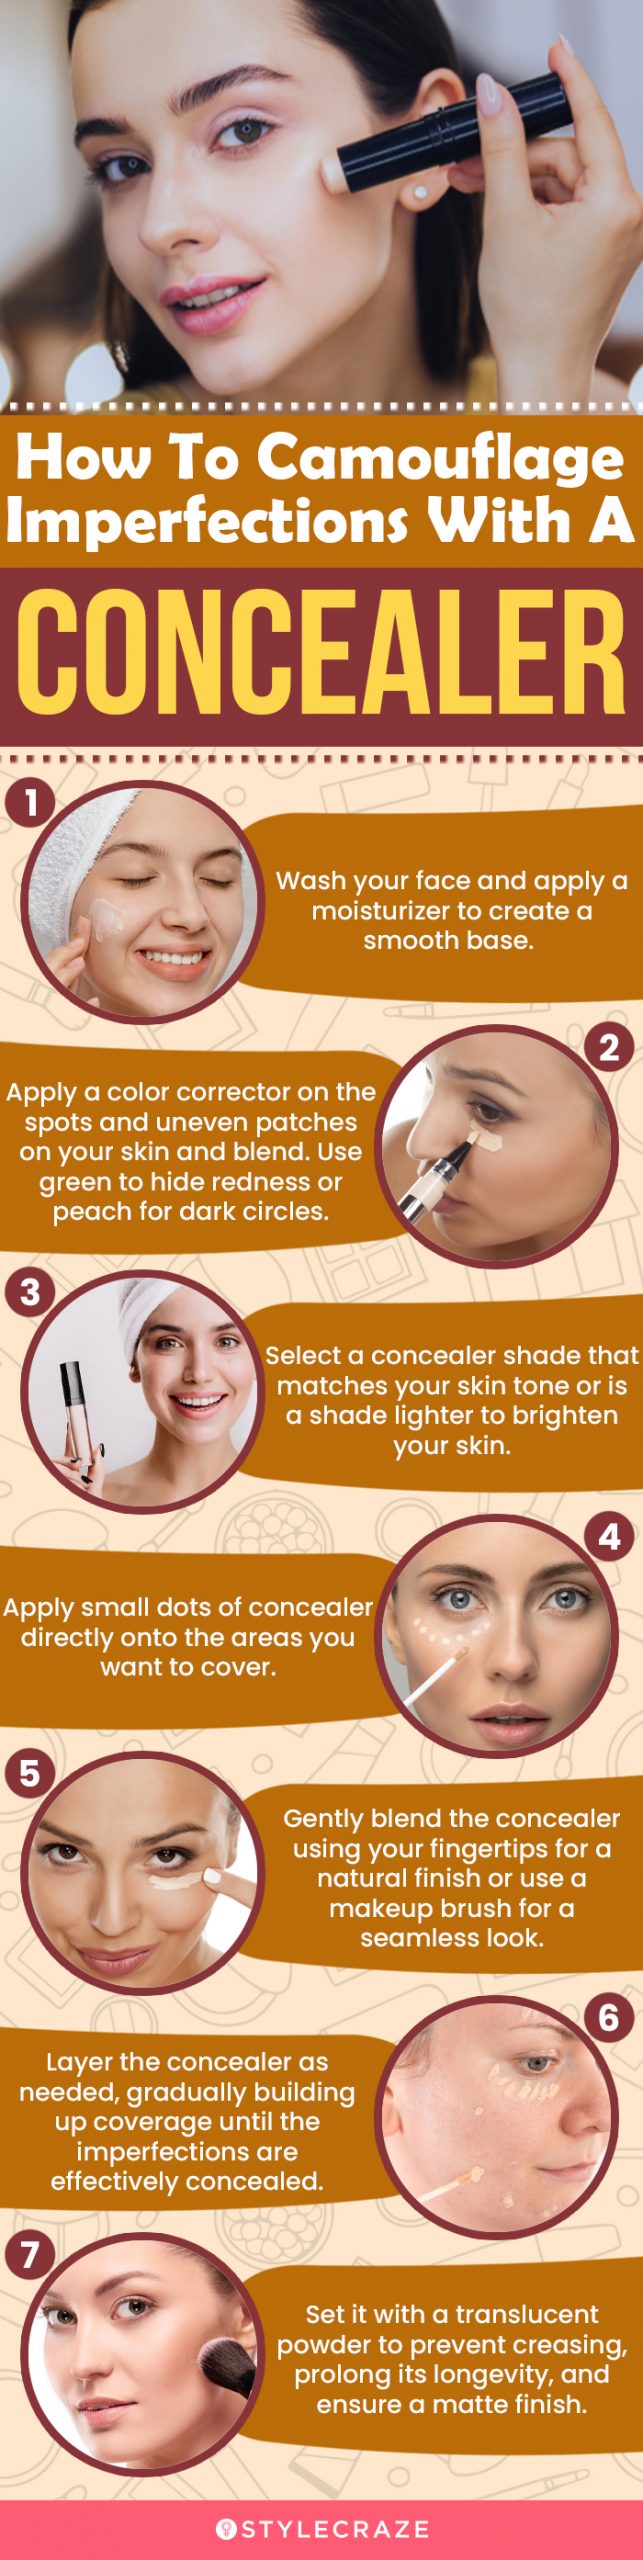 How To Camouflage Imperfections With Concealer (infographic)